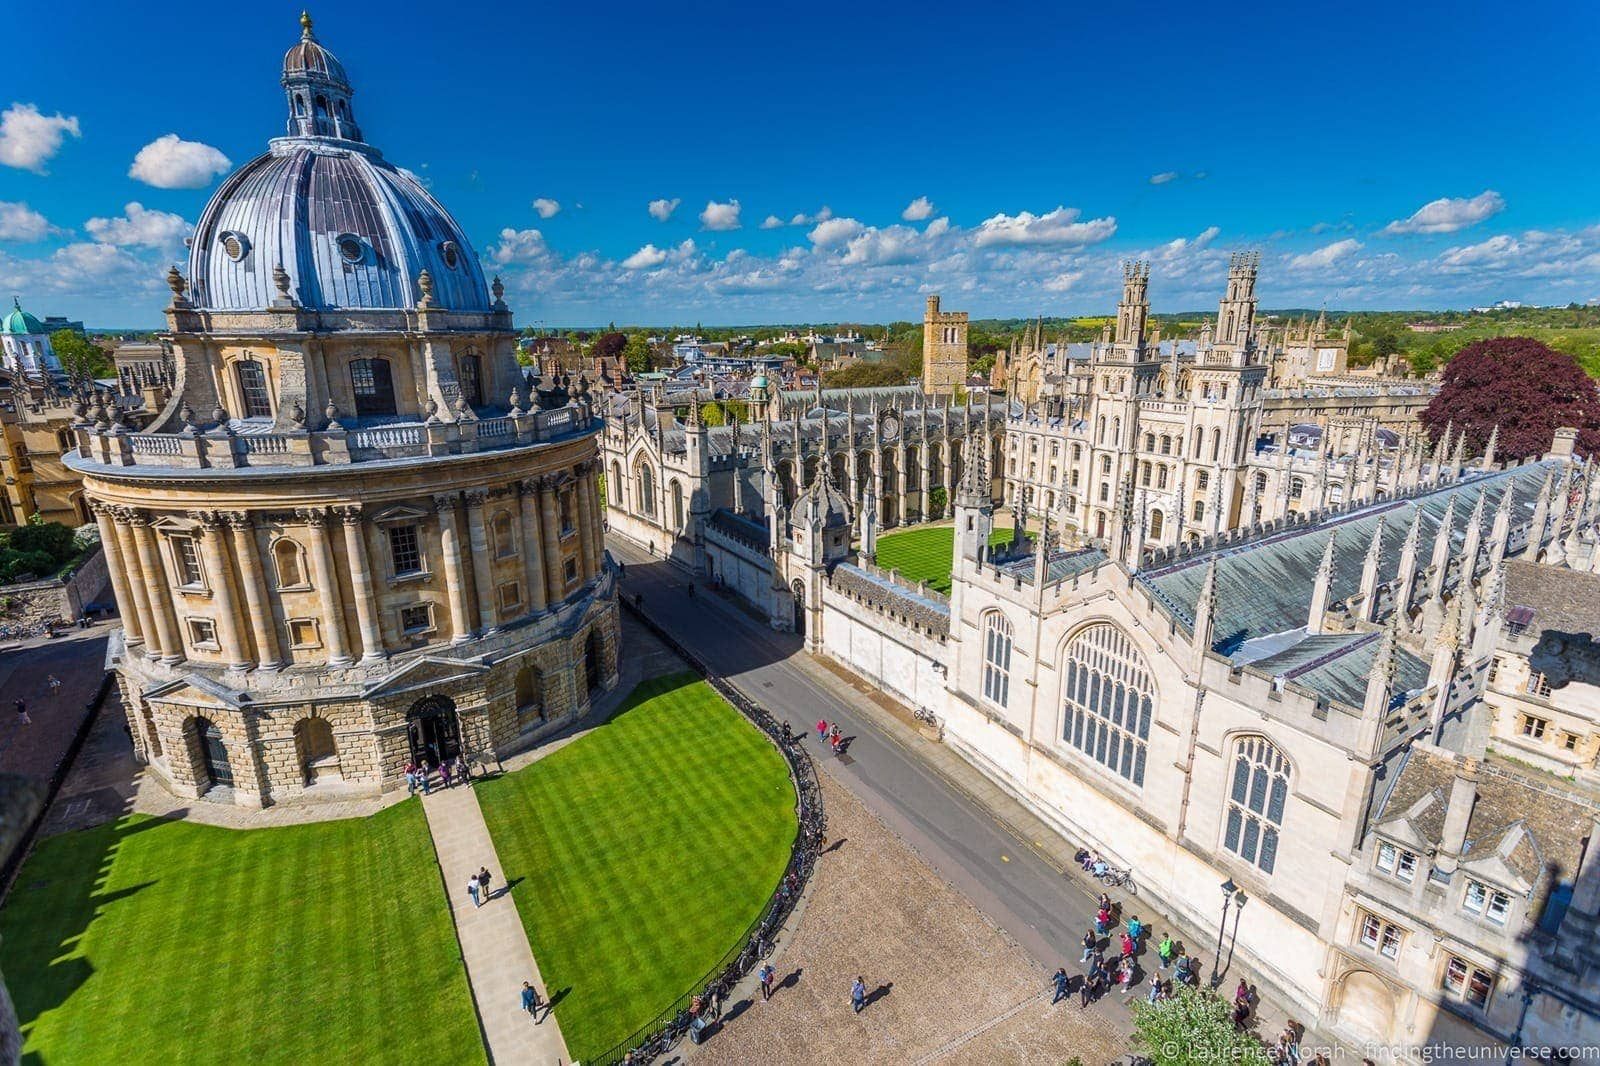 Tour De Lit Avis Fraîche A Day Trip to Oxford Things to Do In Oxford for A Day Finding the